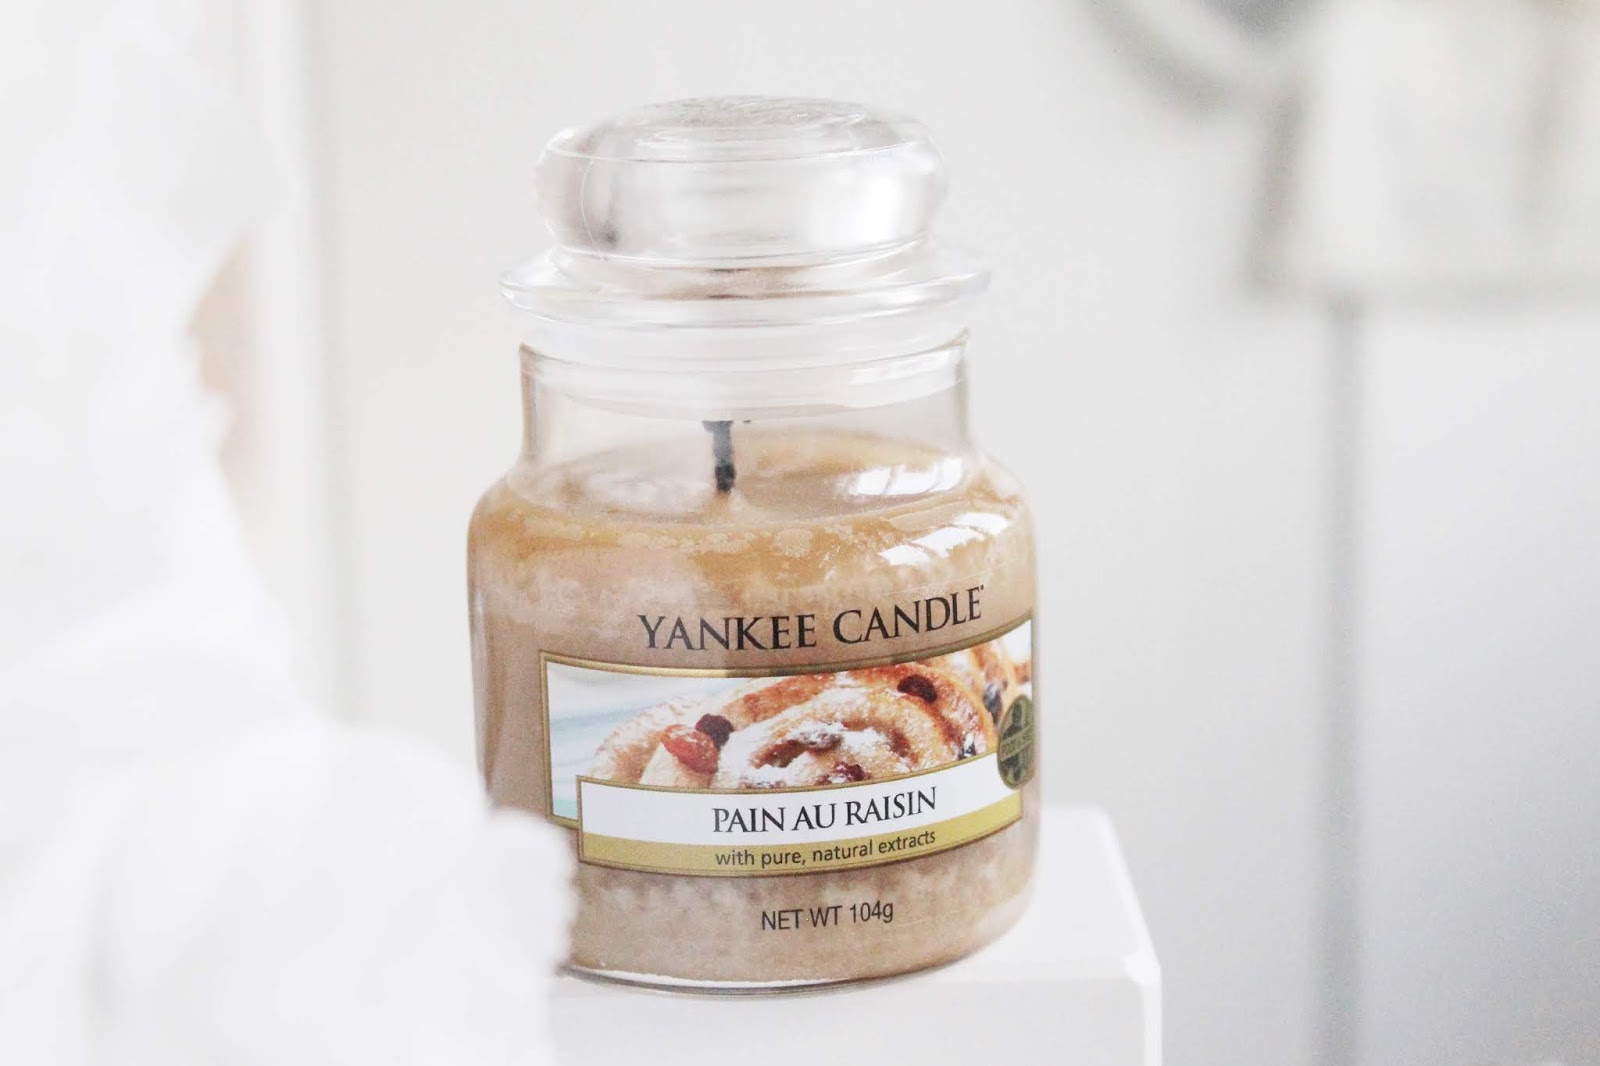 Blog fashion haul, Disney Marie collection, Yankee candle, River Island and New Look